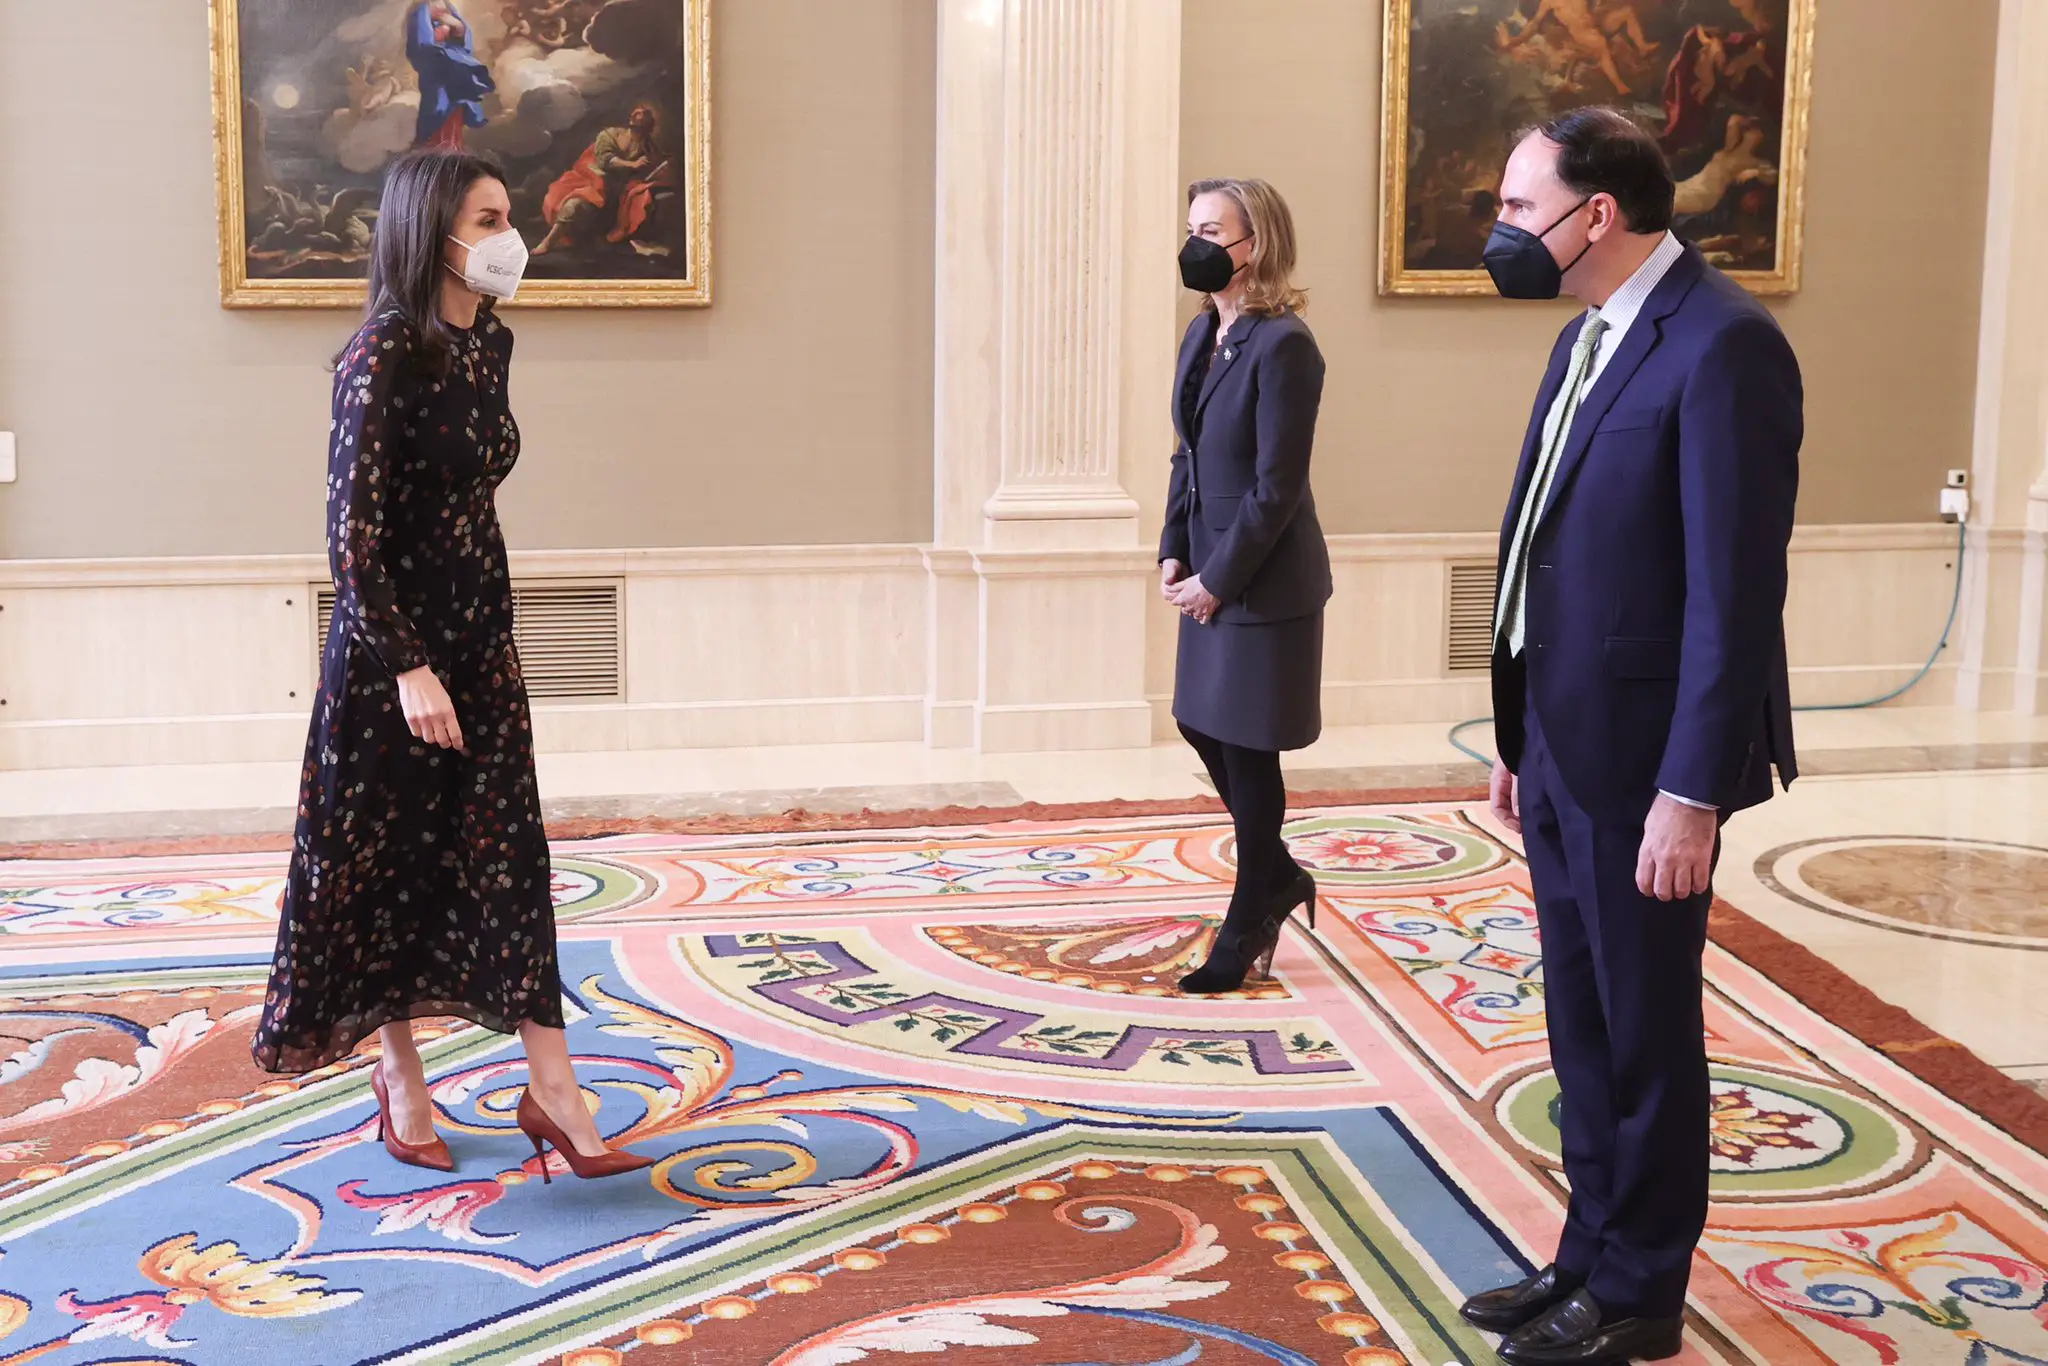 Queen Letizia met with the representatives of the Code.org movement for Europe, Africa, and the Middle East.